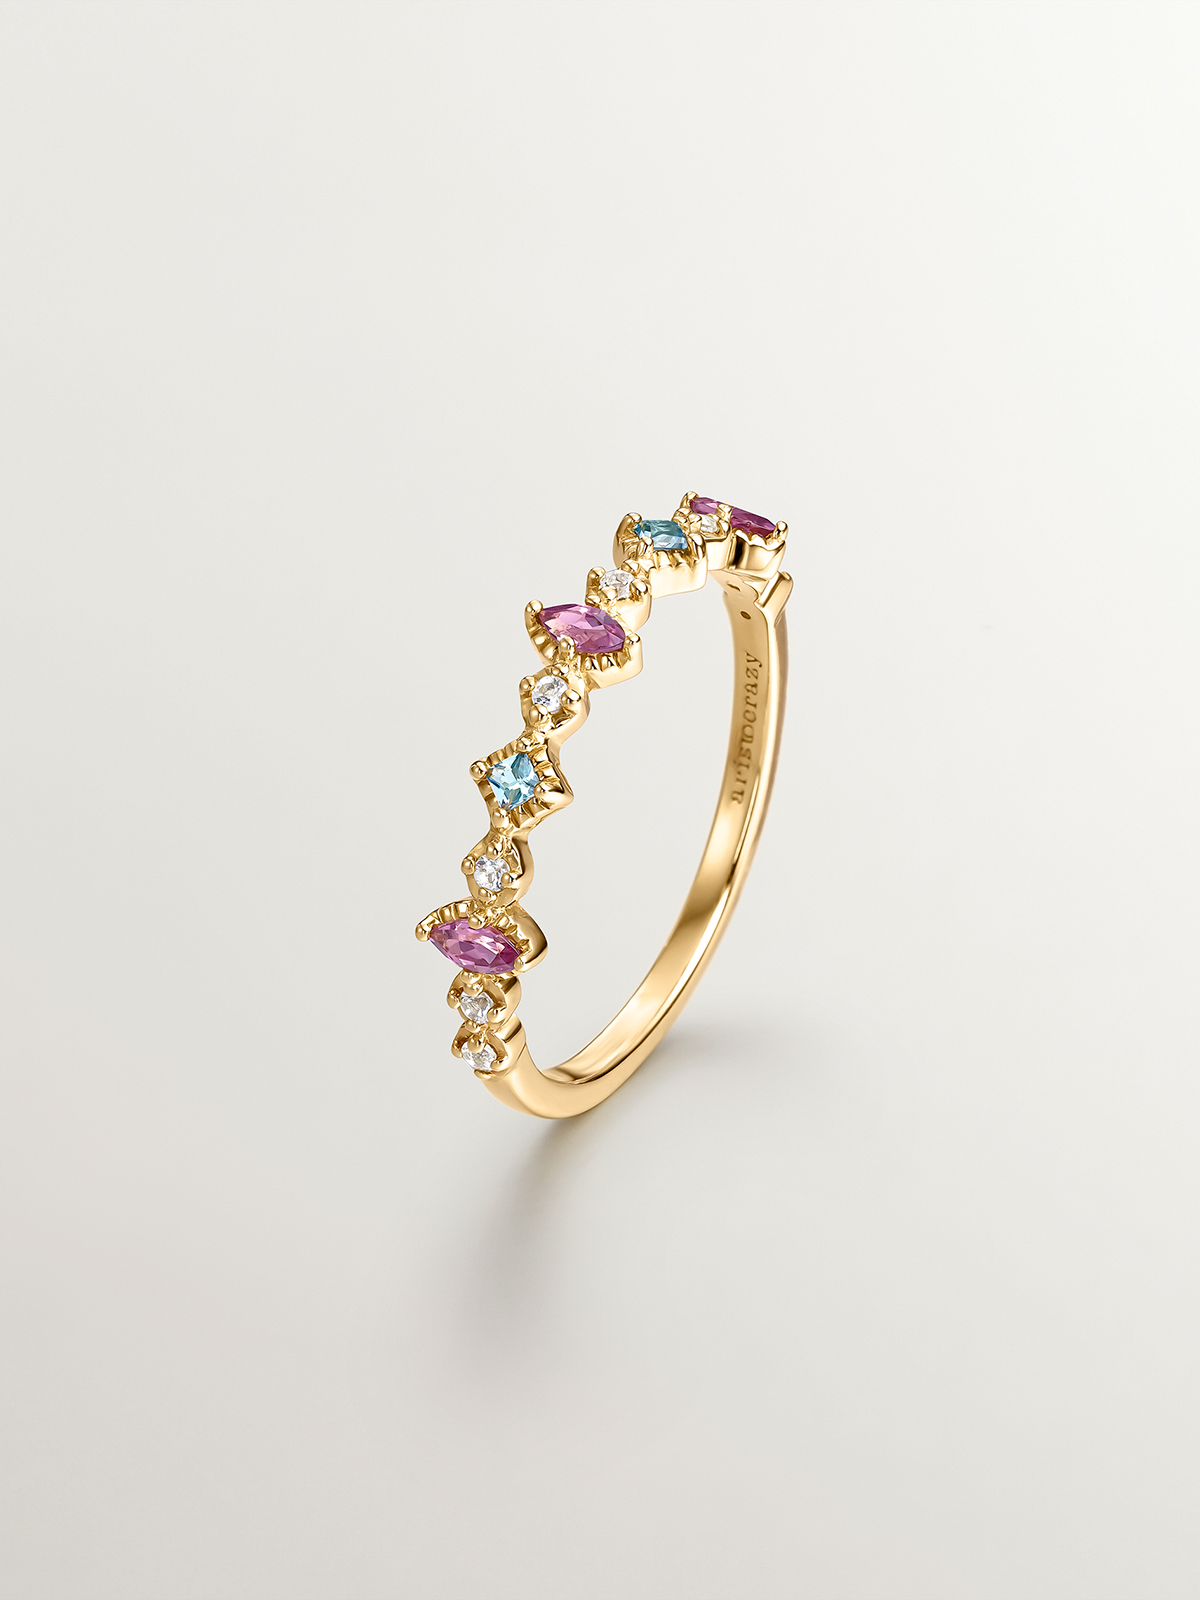 925 Silver ring bathed in 18K yellow gold with topaz and rhodolites.